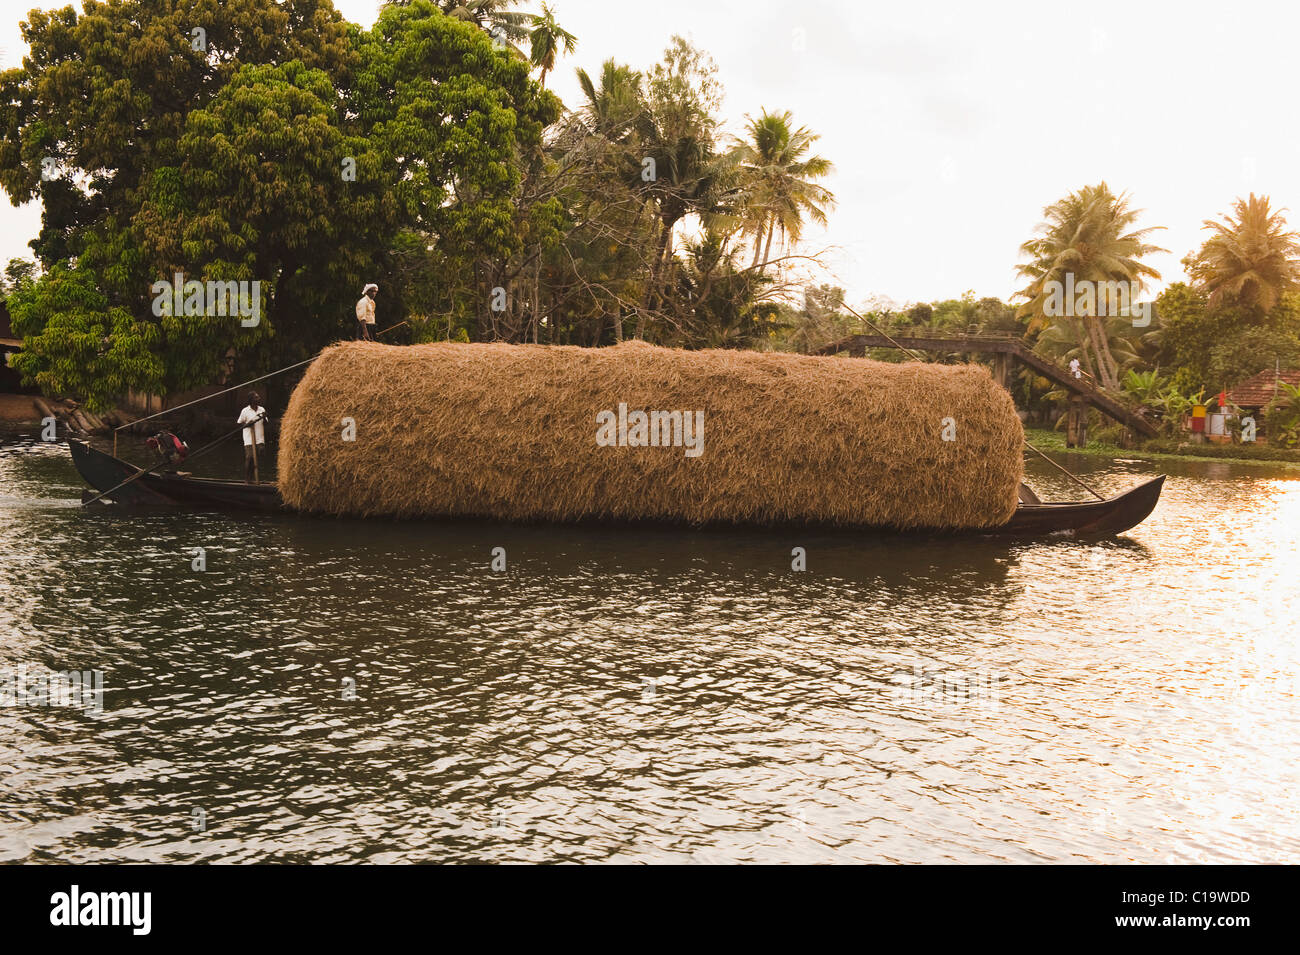 Hay on boat, Kerala Backwaters, Alleppey, Alappuzha District, Kerala, India Stock Photo